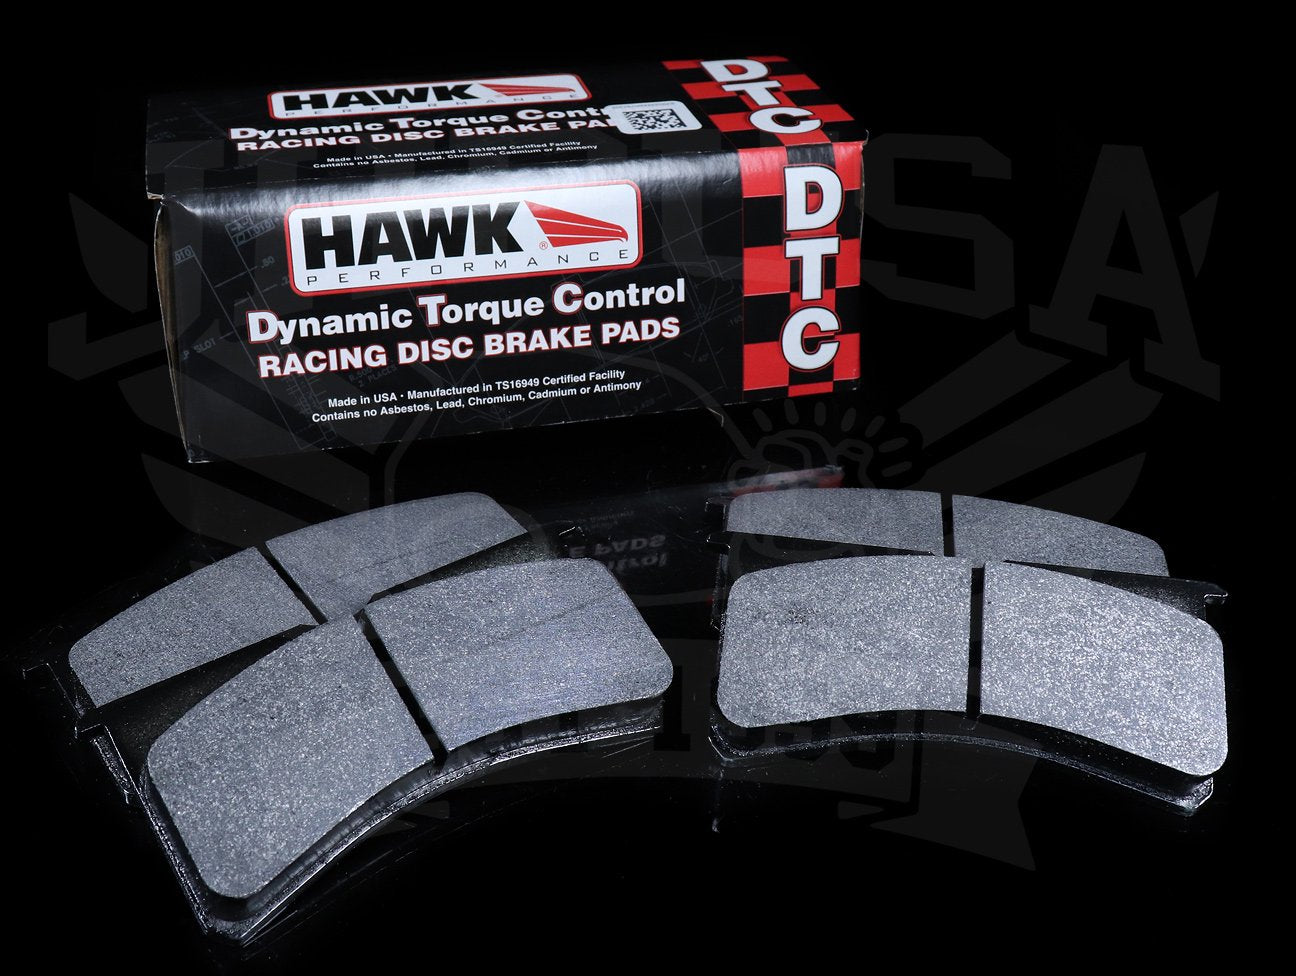 Hawk DTC-60 Front Race Brake Pads - Accord / TSX / Delsol